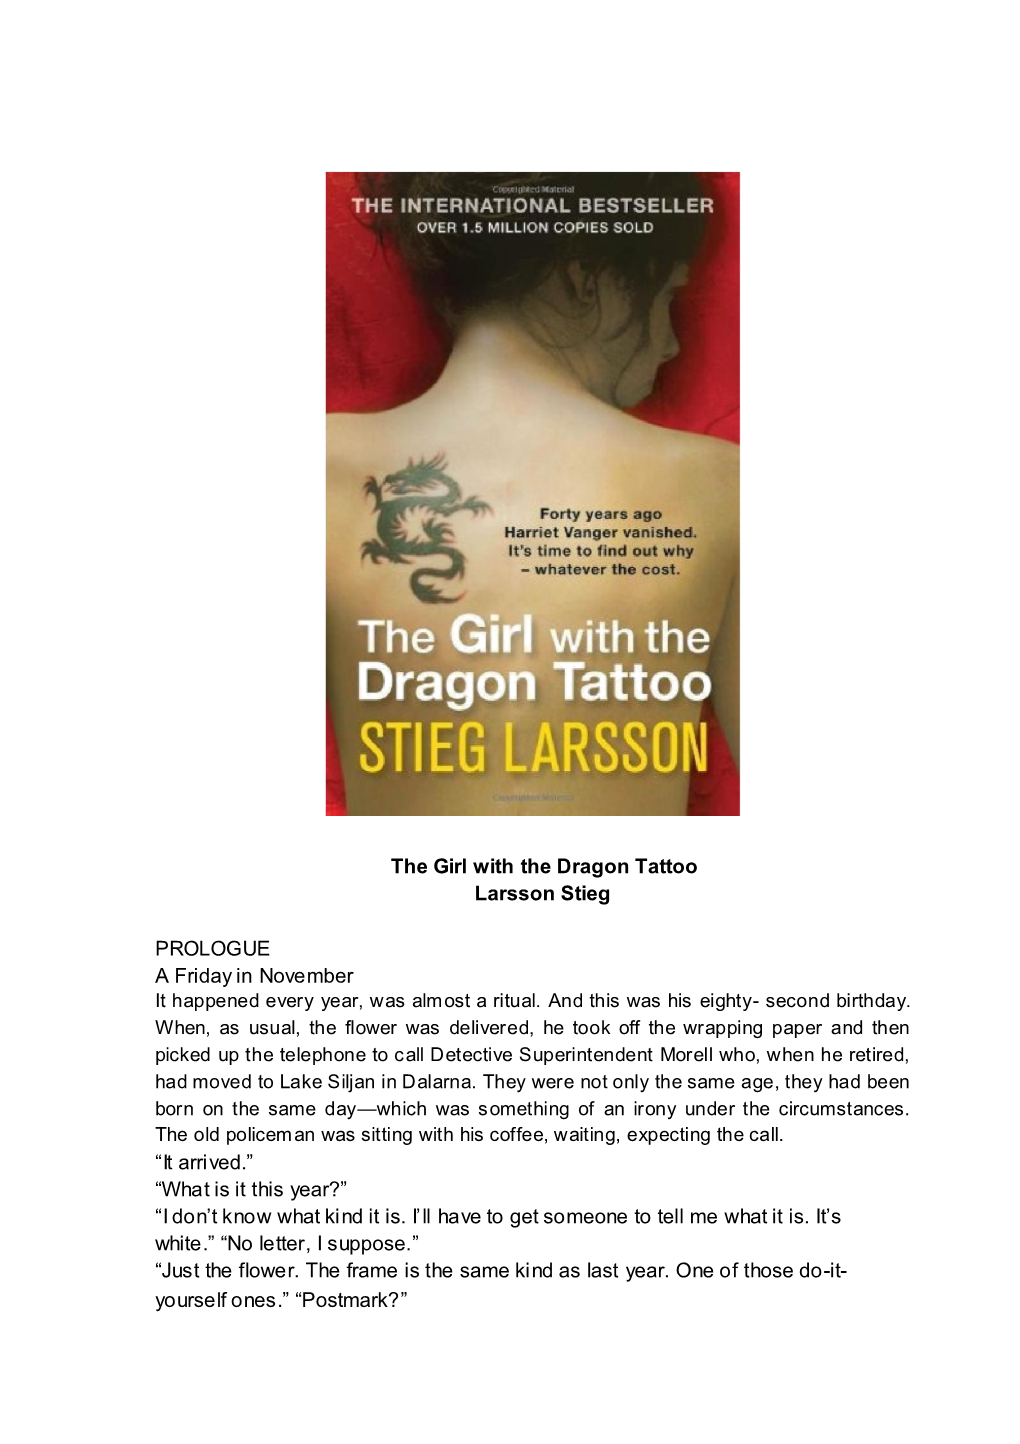 The Girl with the Dragon Tattoo Larsson Stieg PROLOGUE a Friday in November “It Arrived.” “What Is It This Year?” “I D